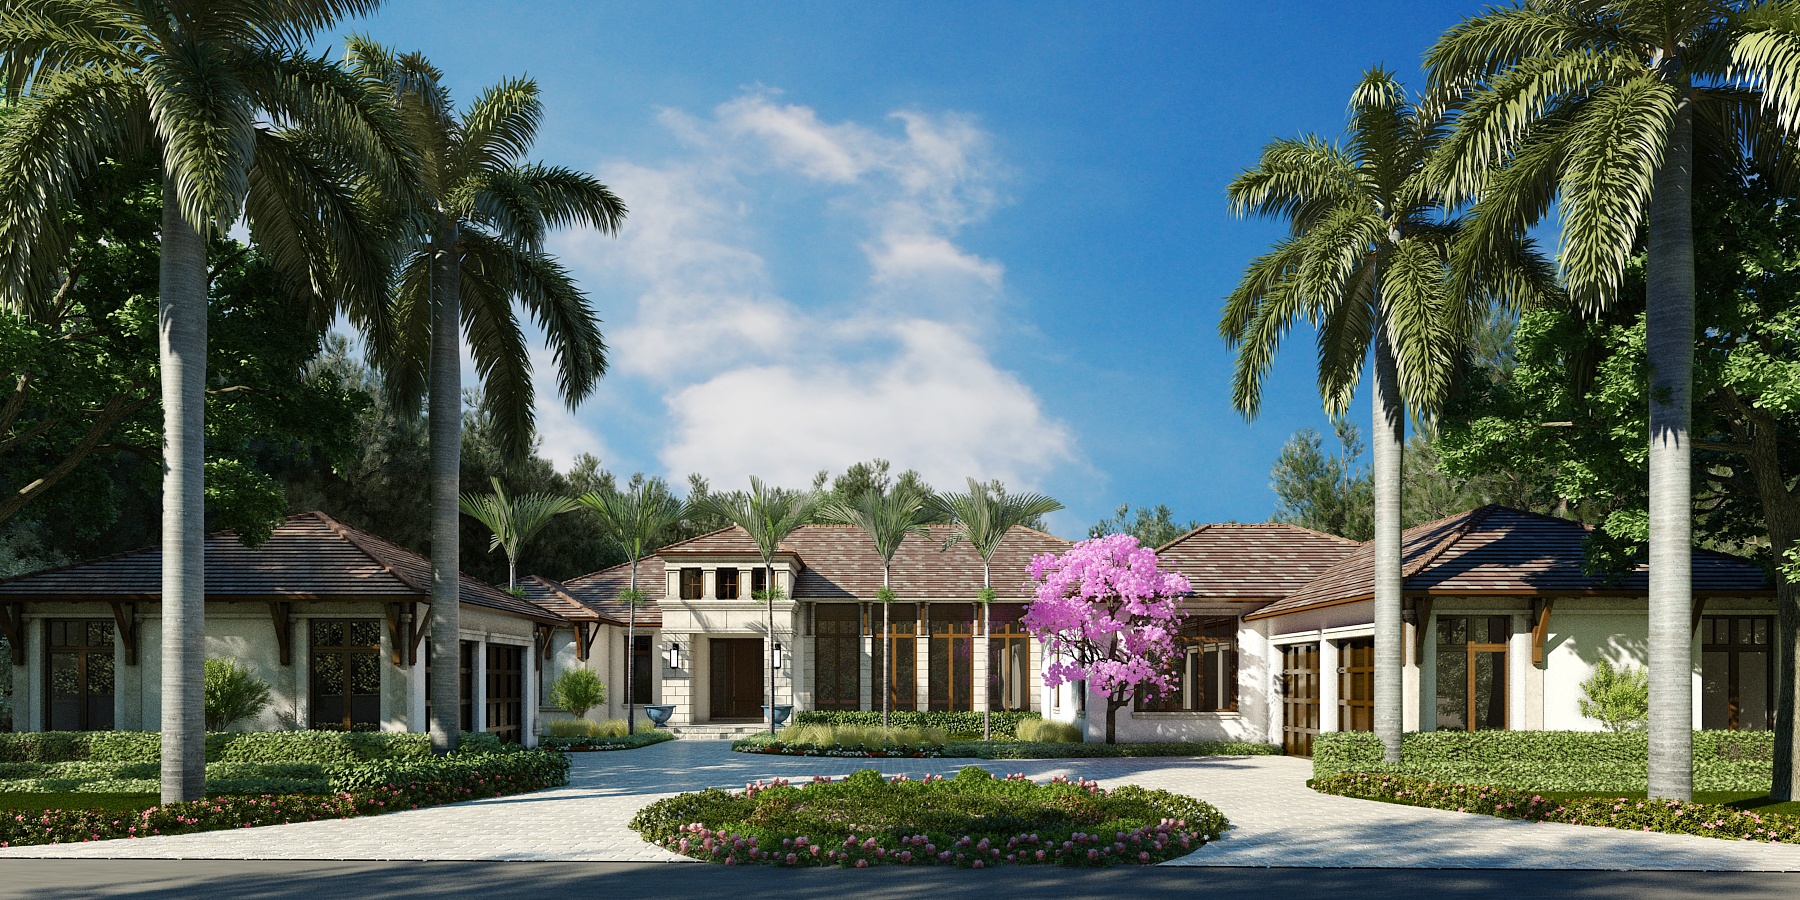 Gulfshore Homes completes plan for Dorado model in Talis Park